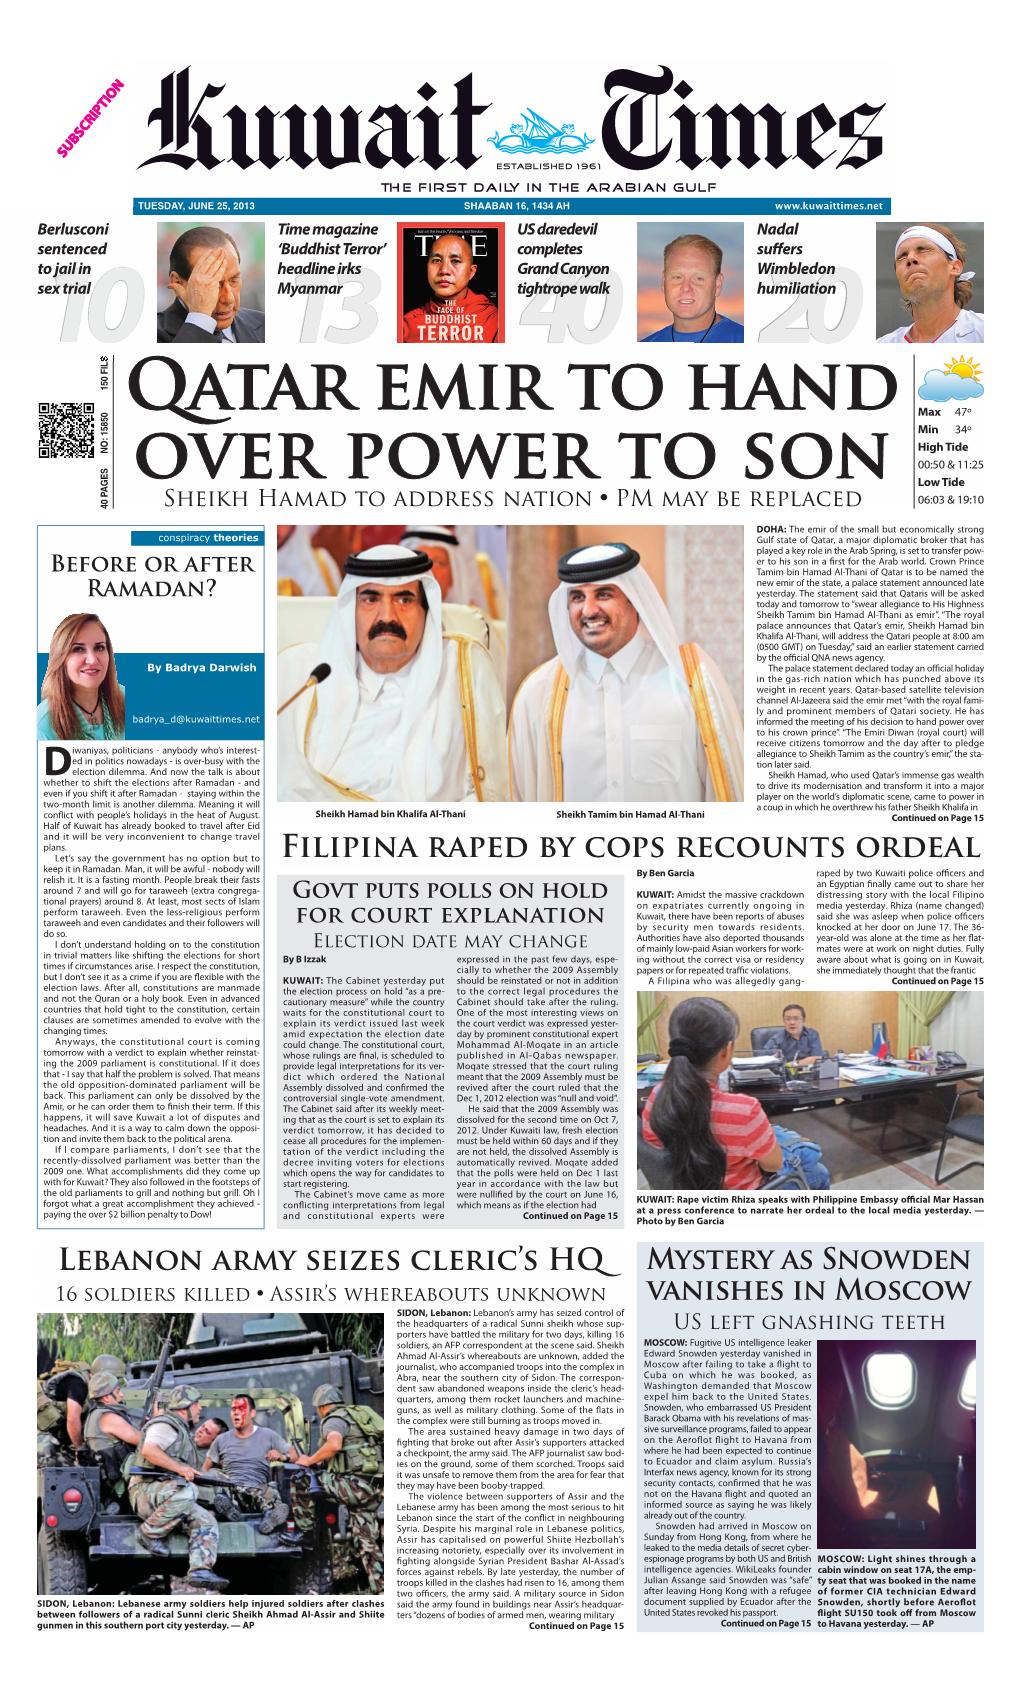 Qatar Emir to Hand Over Power to Son My Civil ID